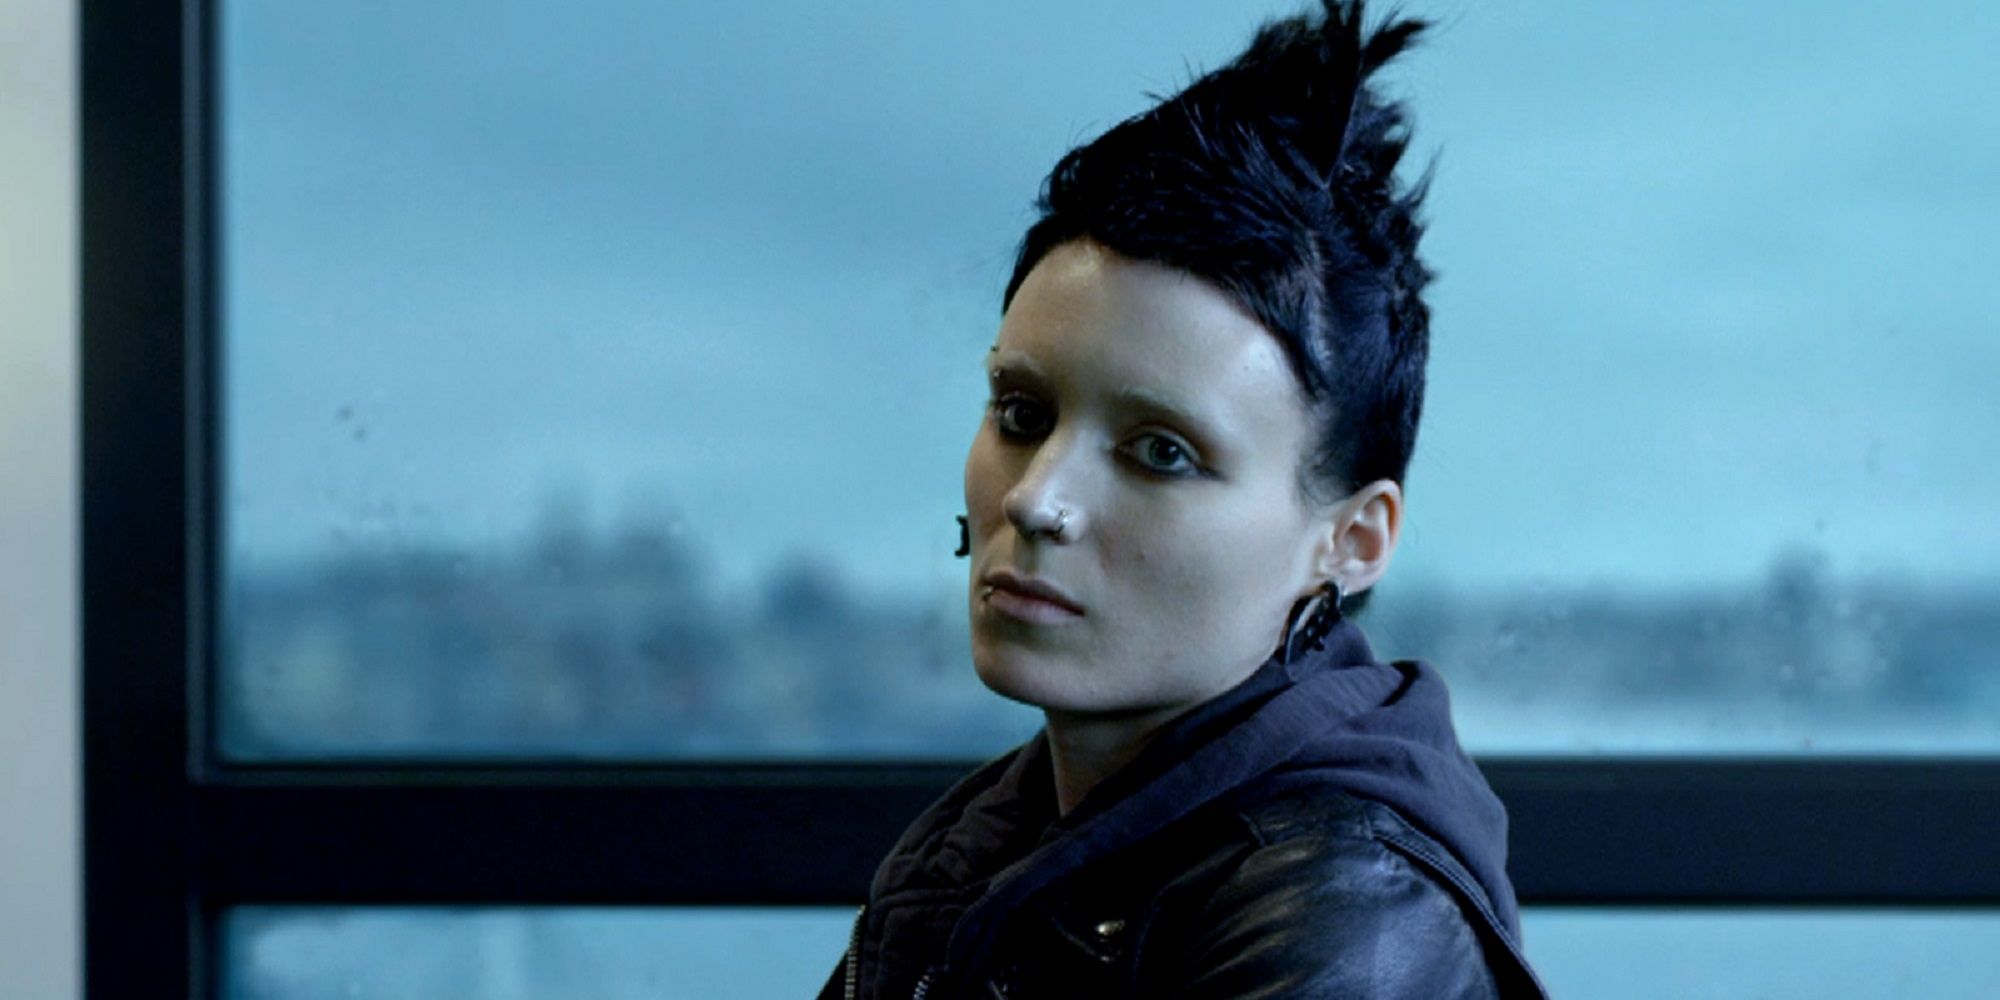 Lisbeth Salander looking serious in The Girl With The Dragon Tattoo.